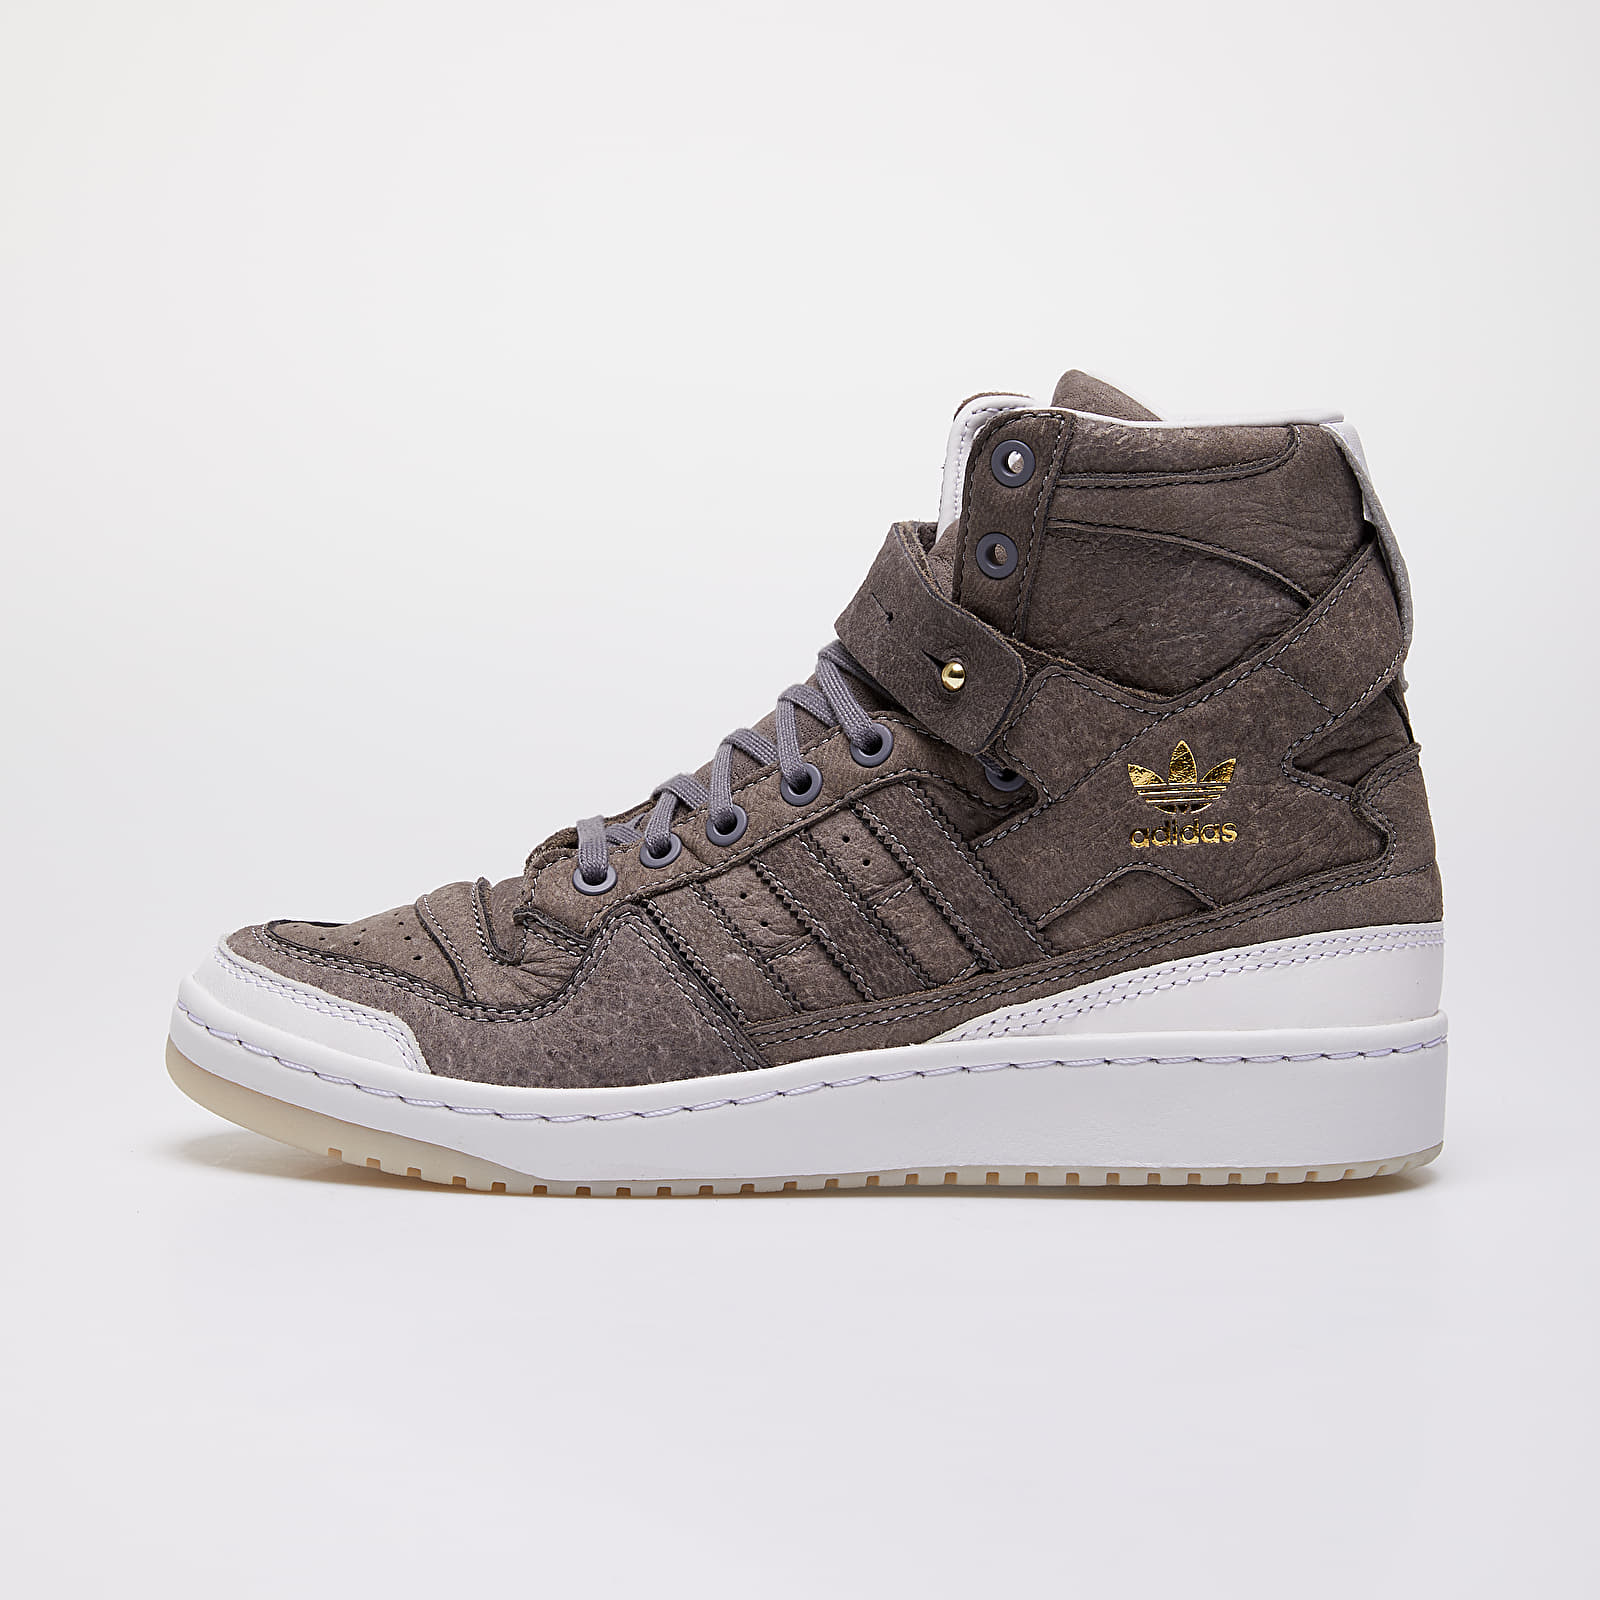 Chaussures et baskets homme adidas Forum Hi "Crafted Pack" Supplier Colour/ Ftw White/ Gold Metallic